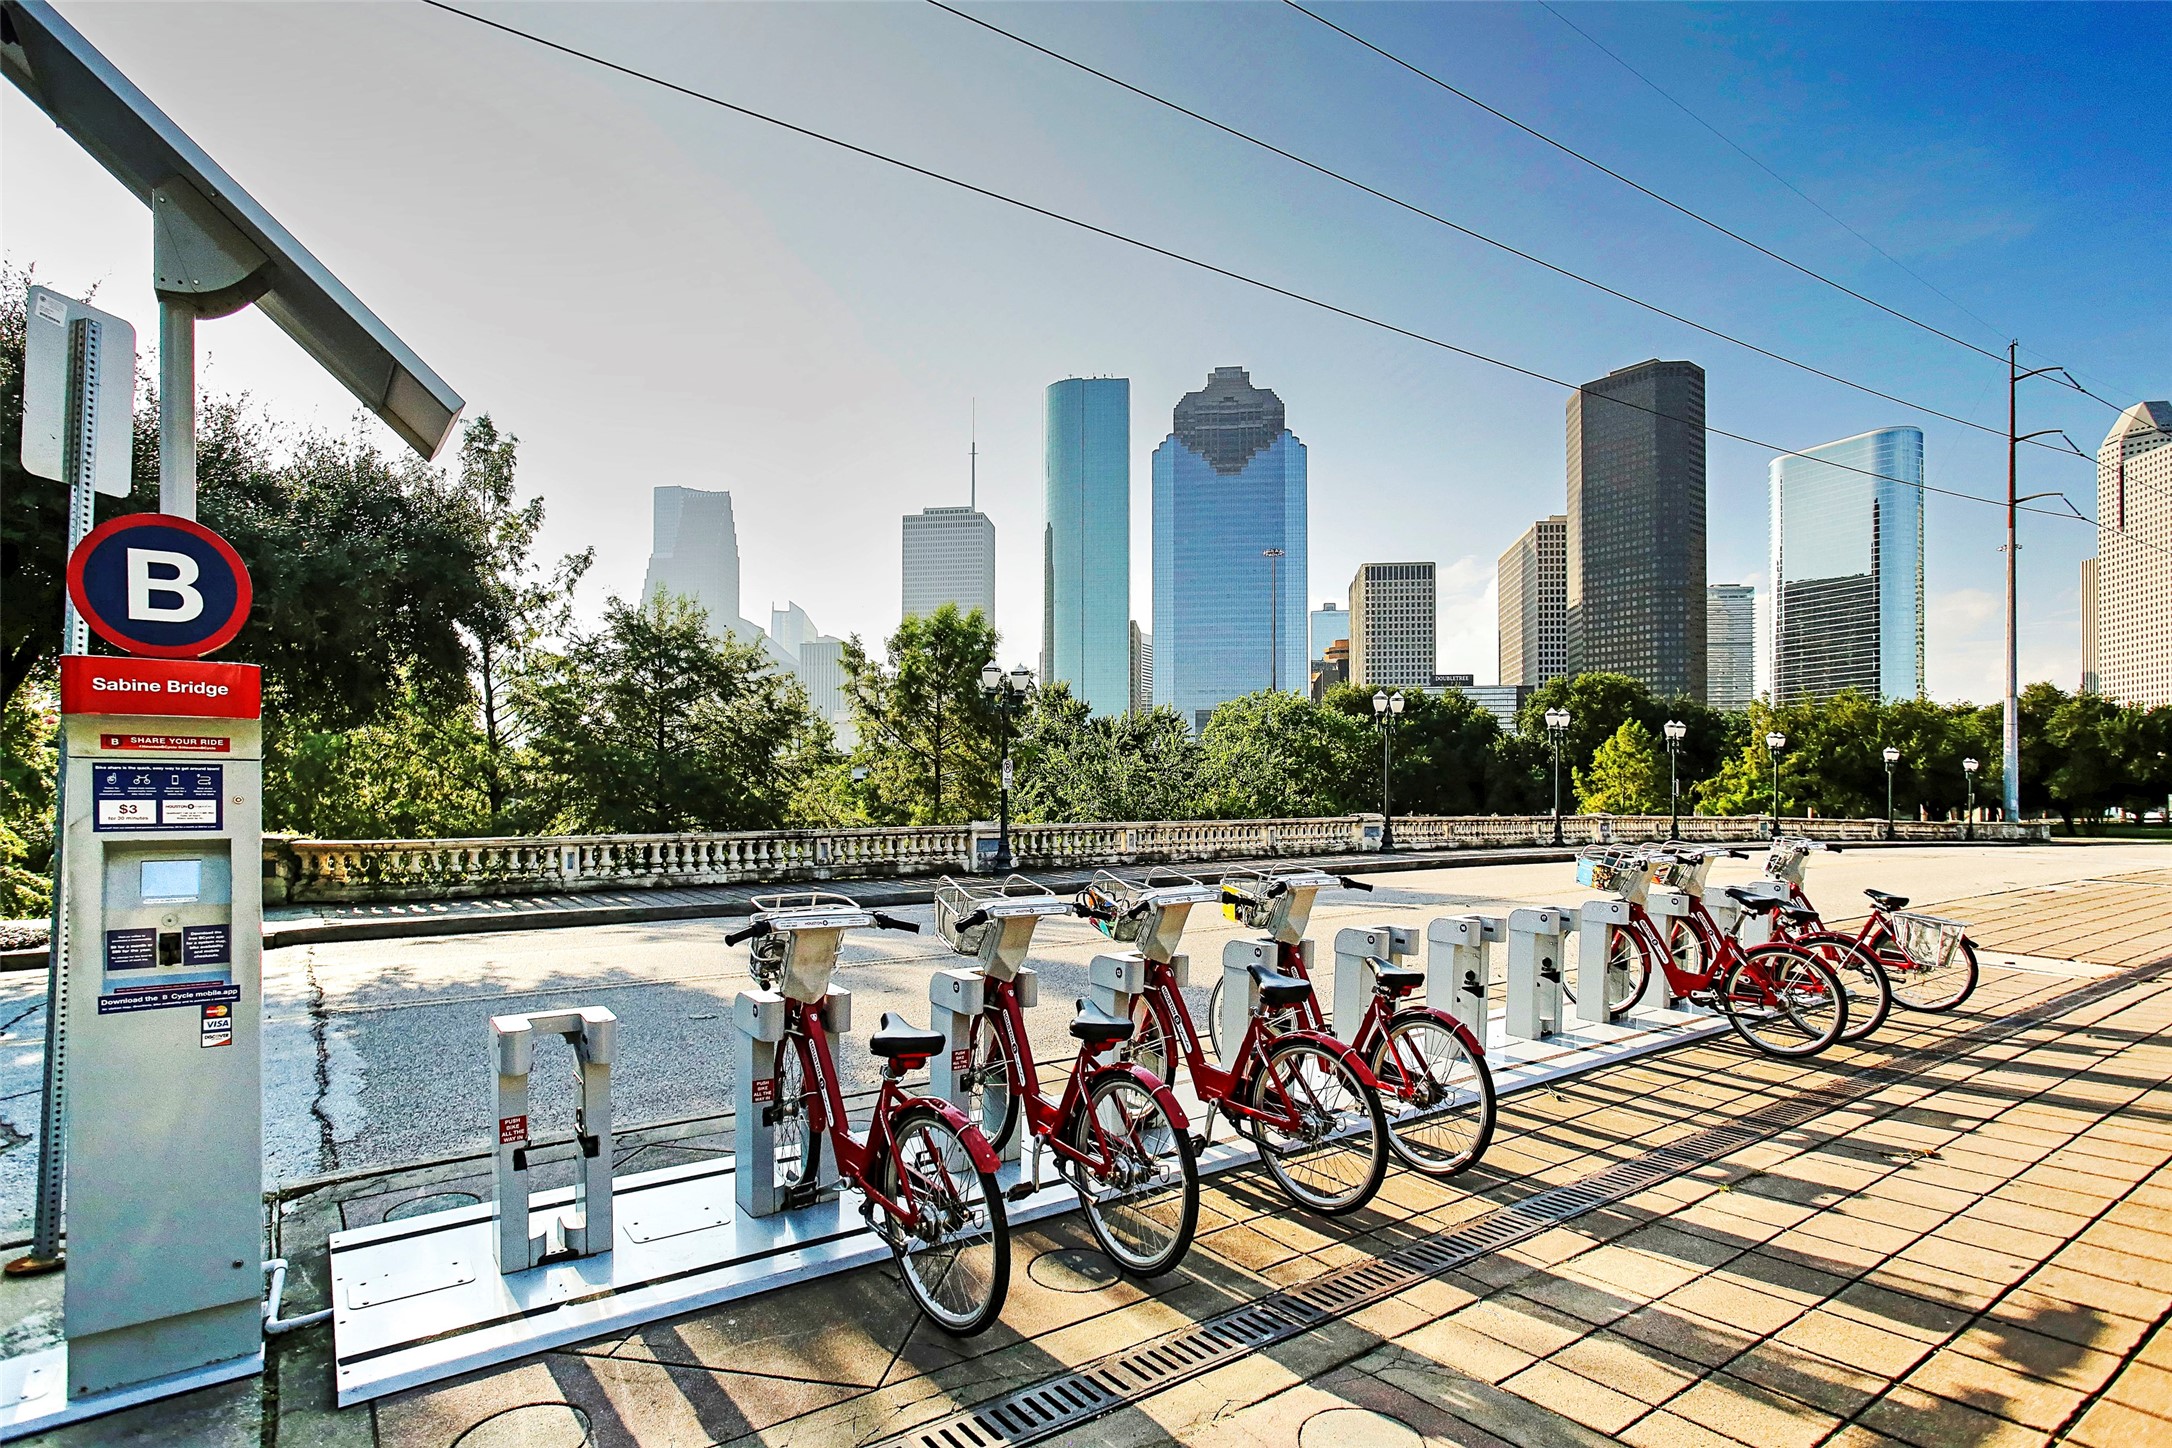 Rent a bike for the day or just for a trip into downtown or the bike trails nearby.
